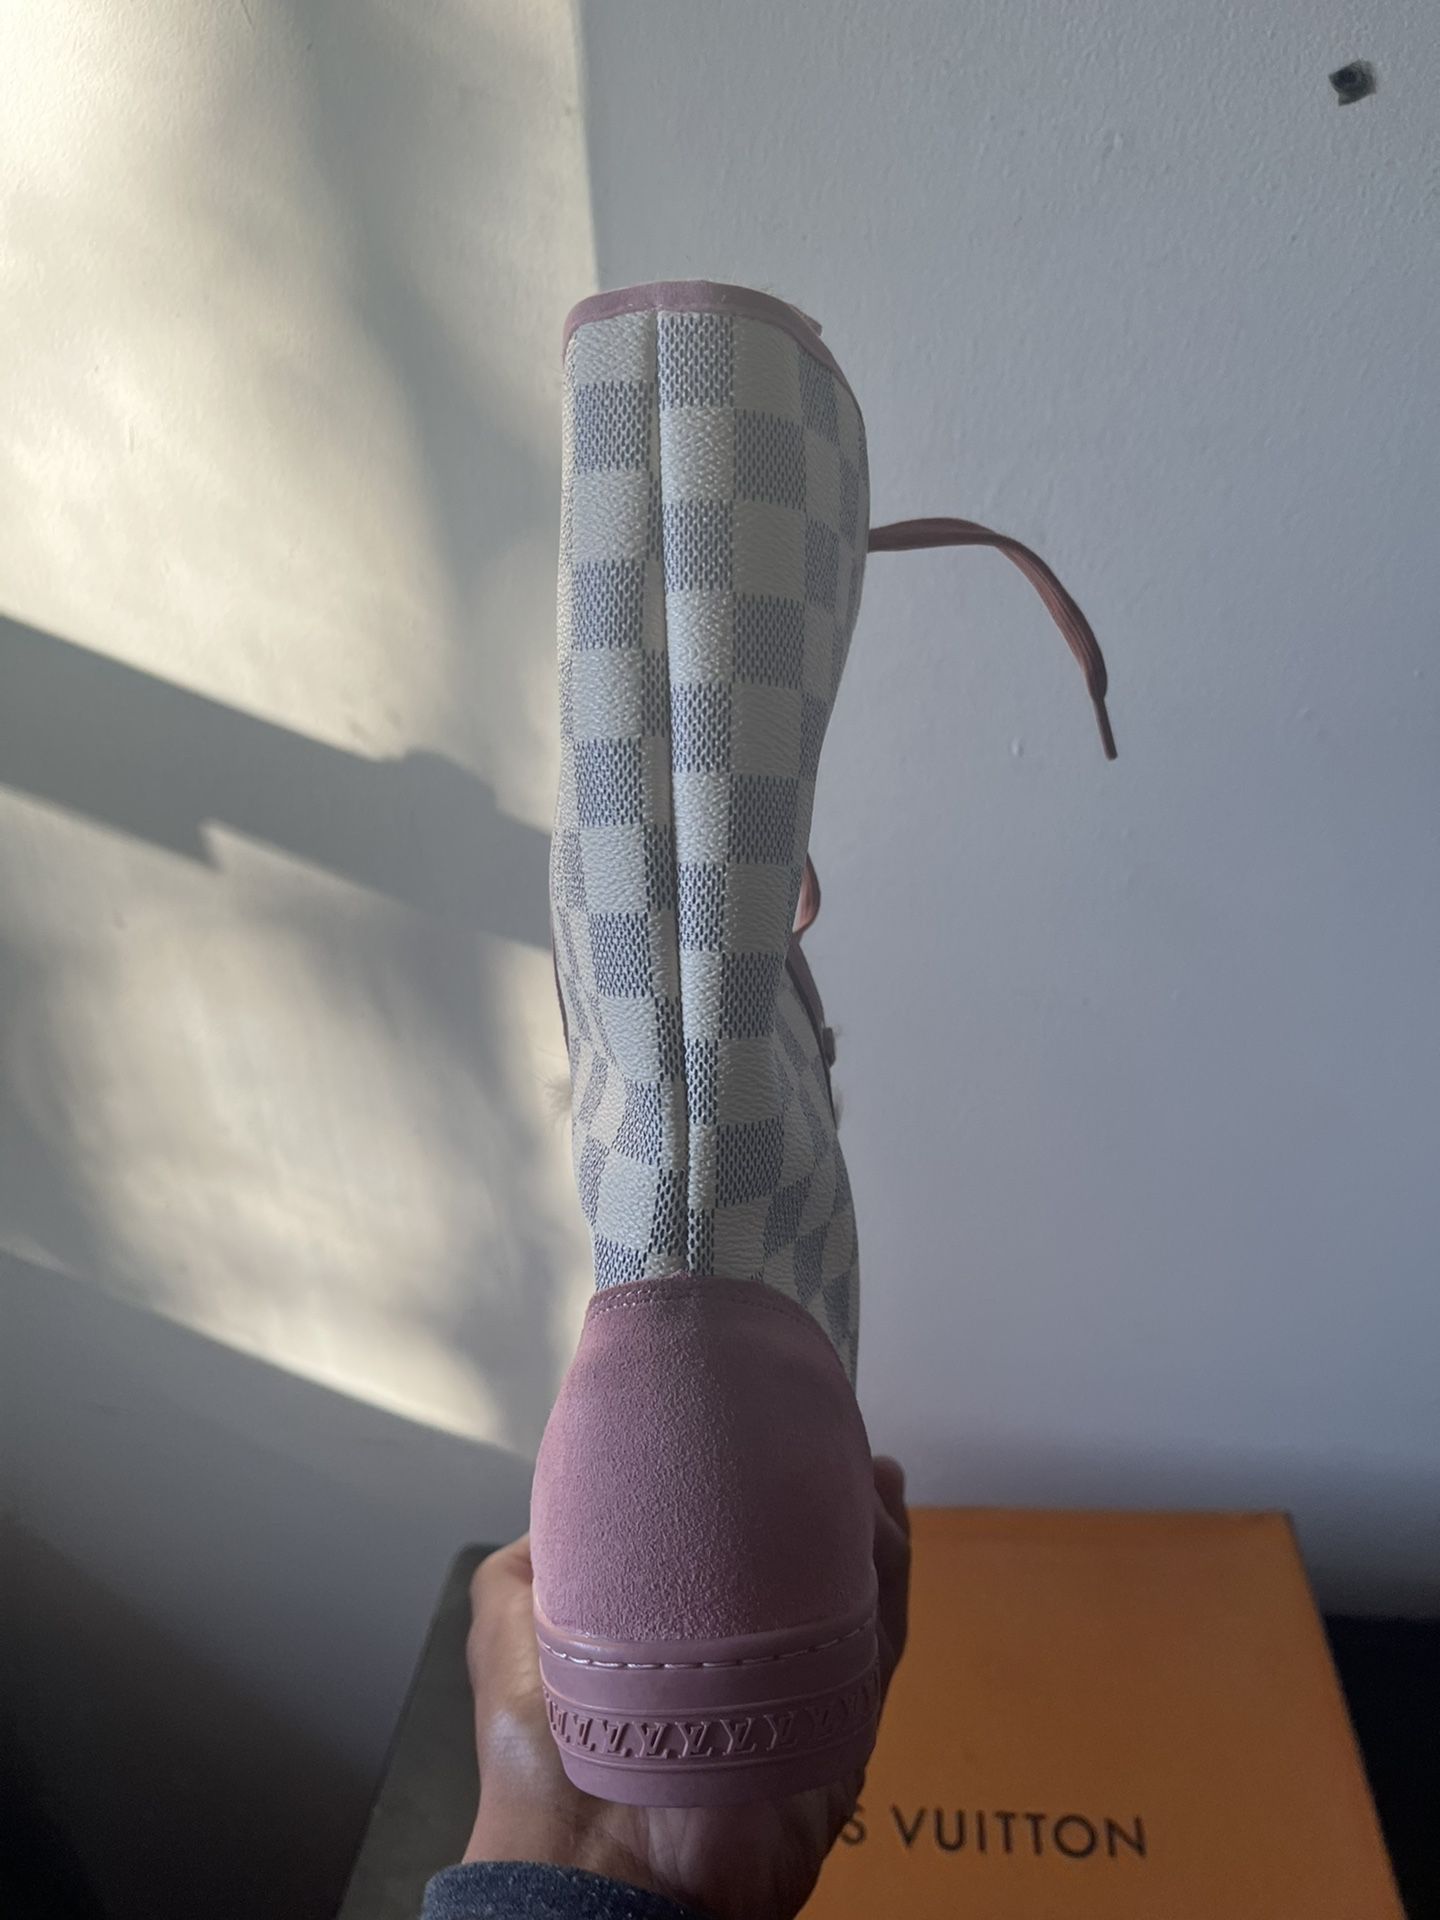 Pink Louisville Vuitton Boots (With Fur Inside)